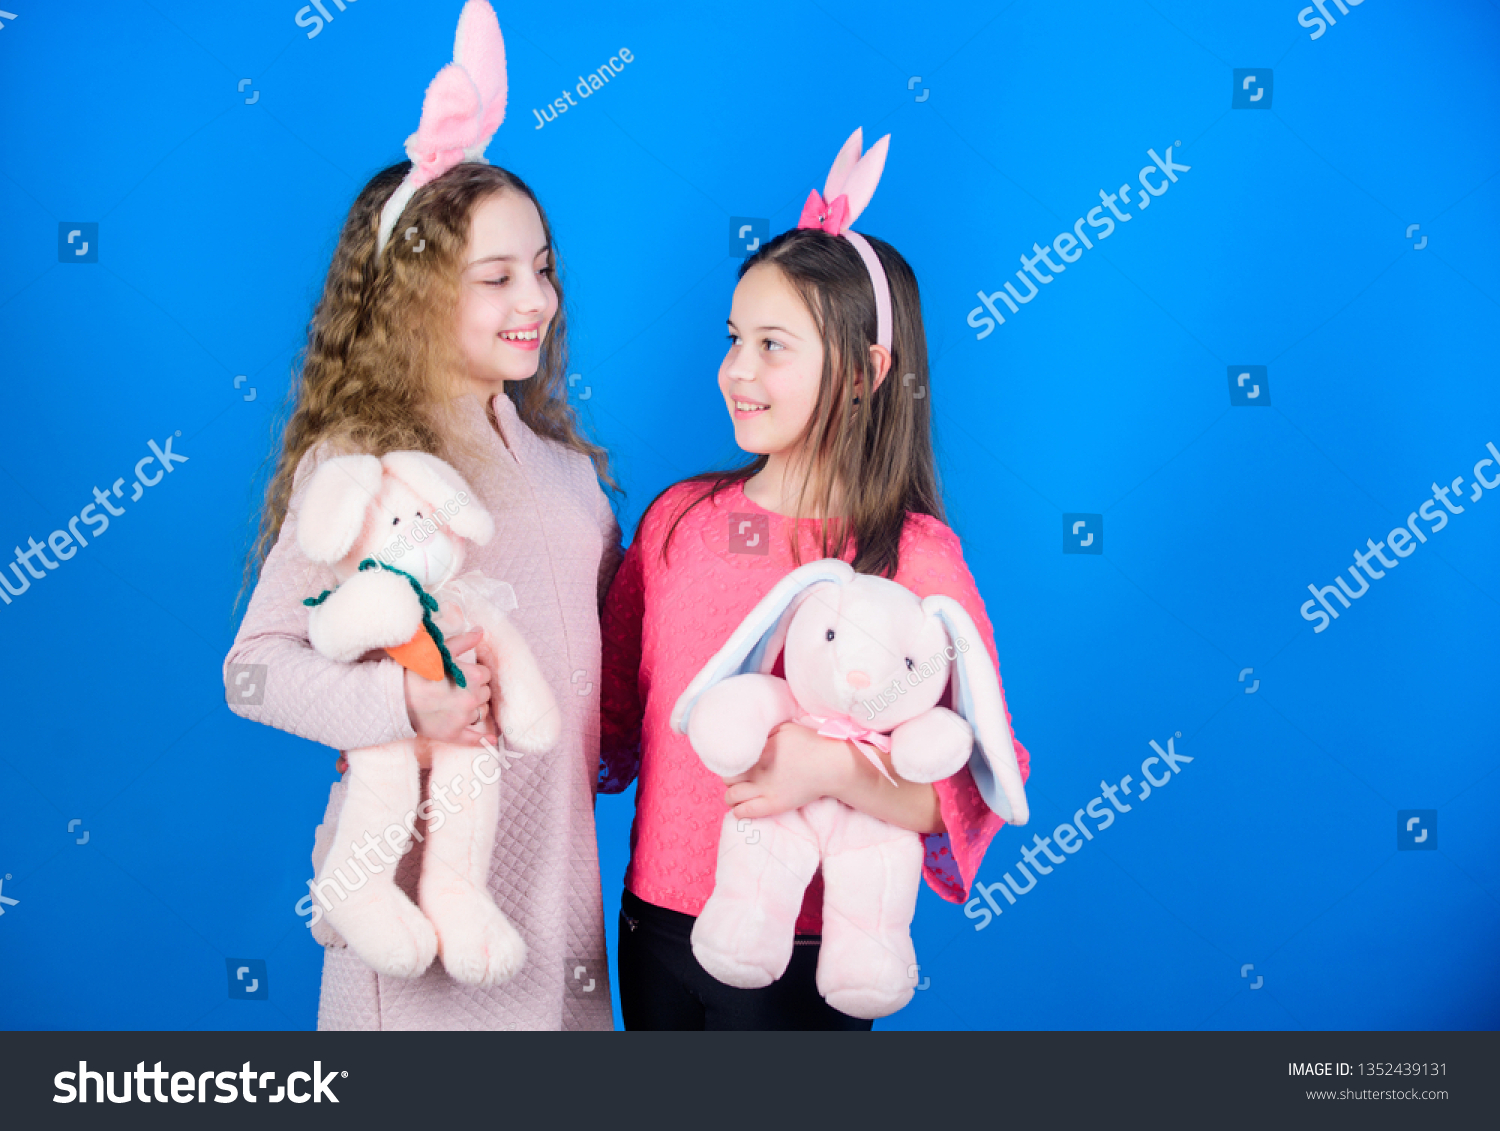 Children with bunny toys on blue background. Sisters smiling cute bunny costumes. Spread joy and happiness around. Friends little girls with bunny ears celebrate Easter. Hope love and joyful living. #1352439131